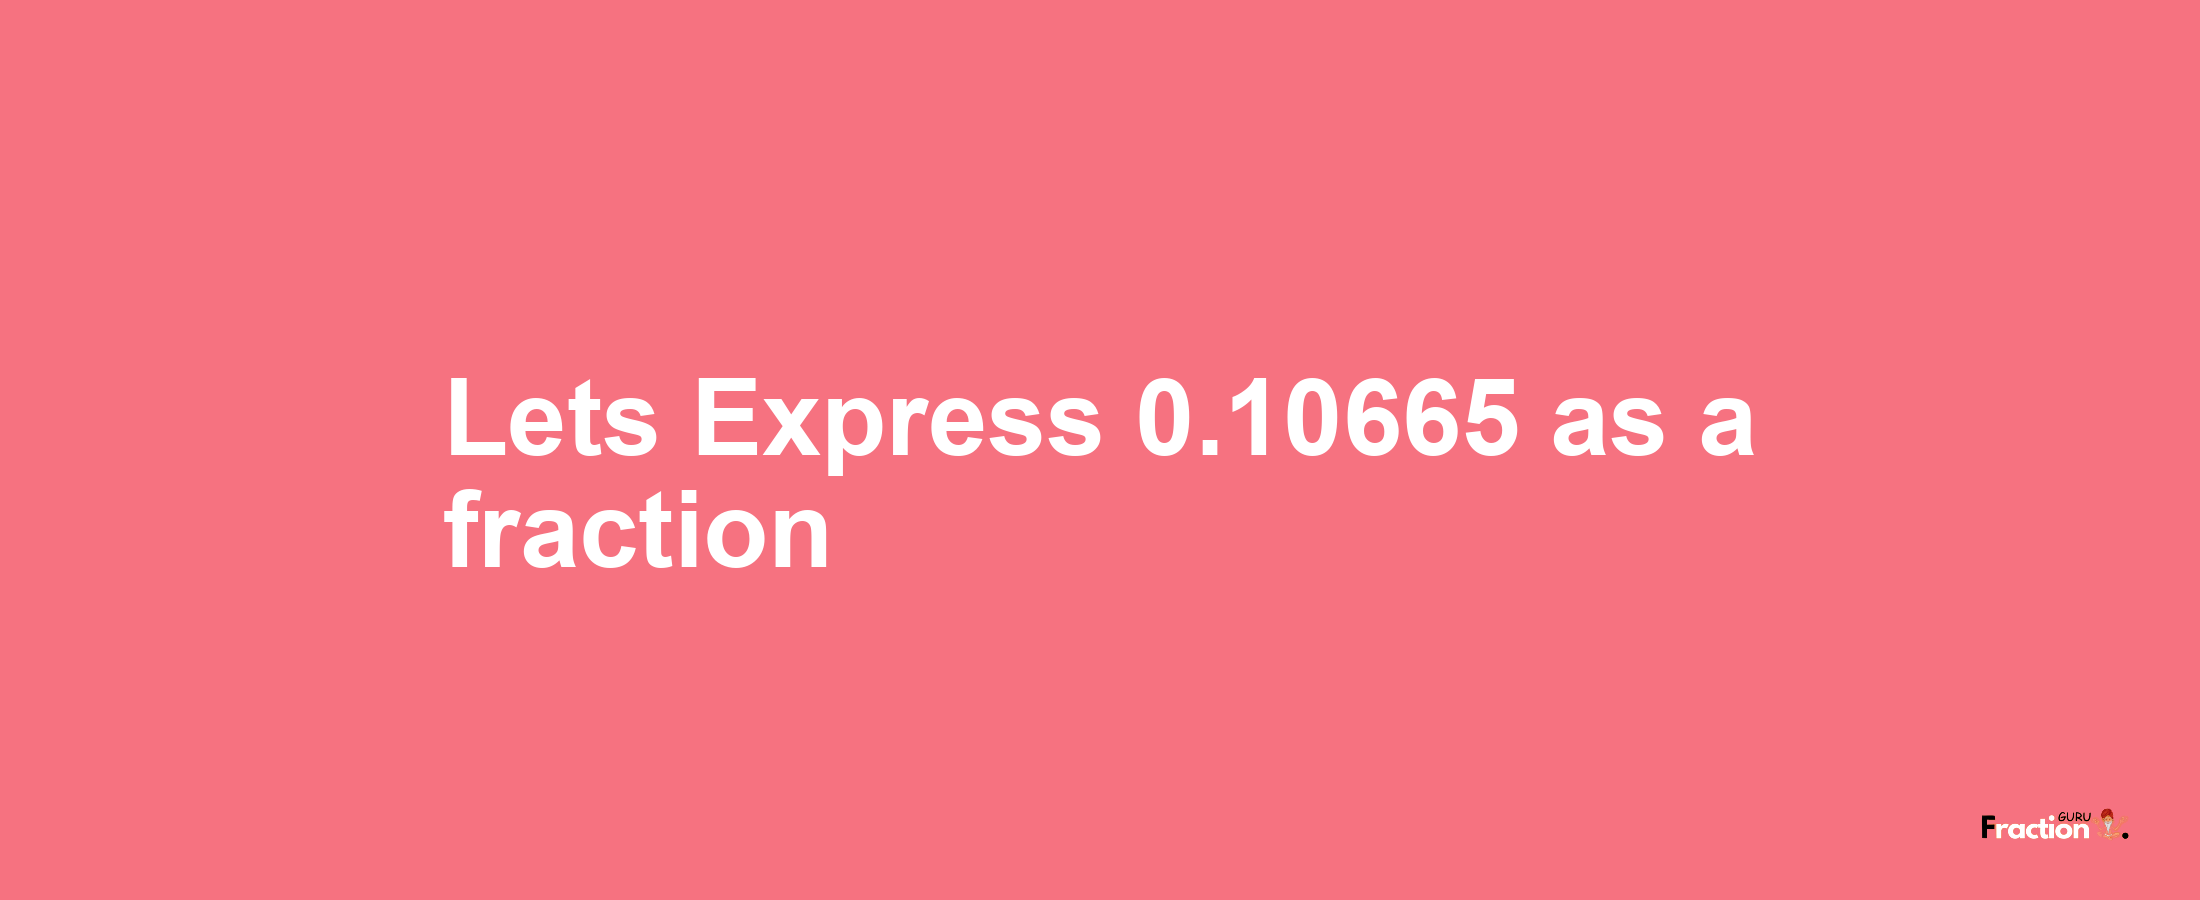 Lets Express 0.10665 as afraction